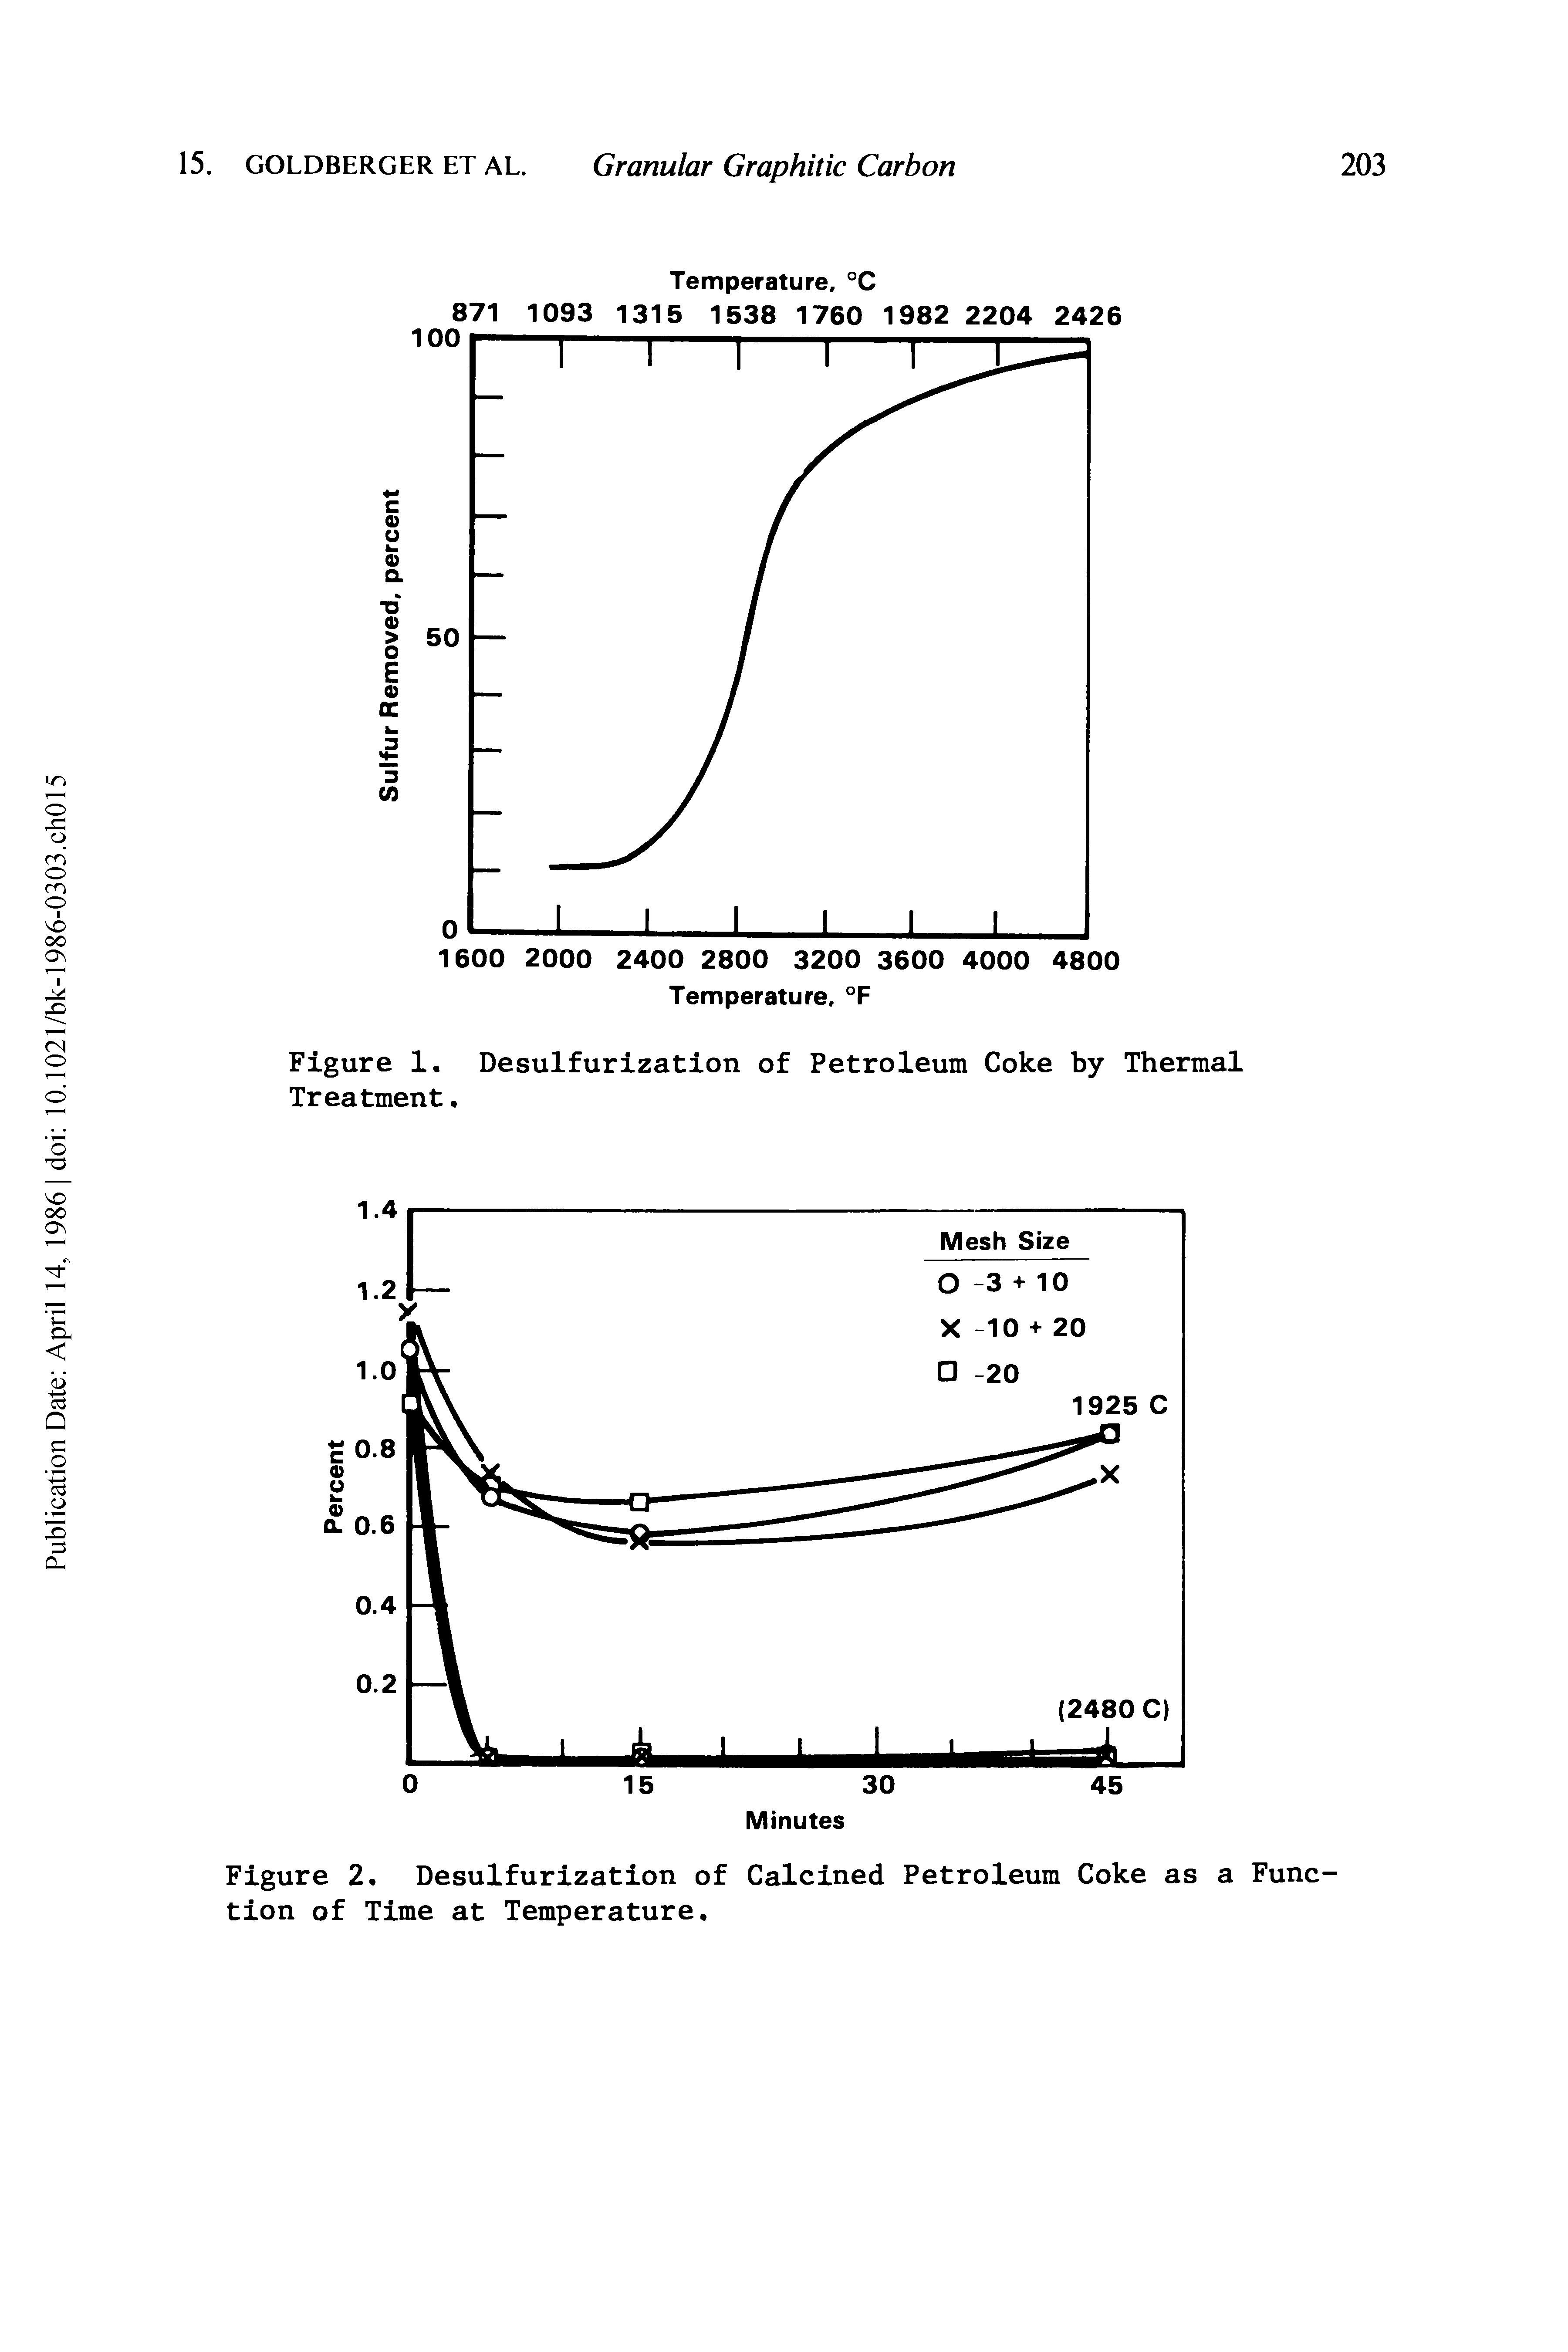 Figure 1. Desulfurization of Petroleum Coke by Thermal Treatment.